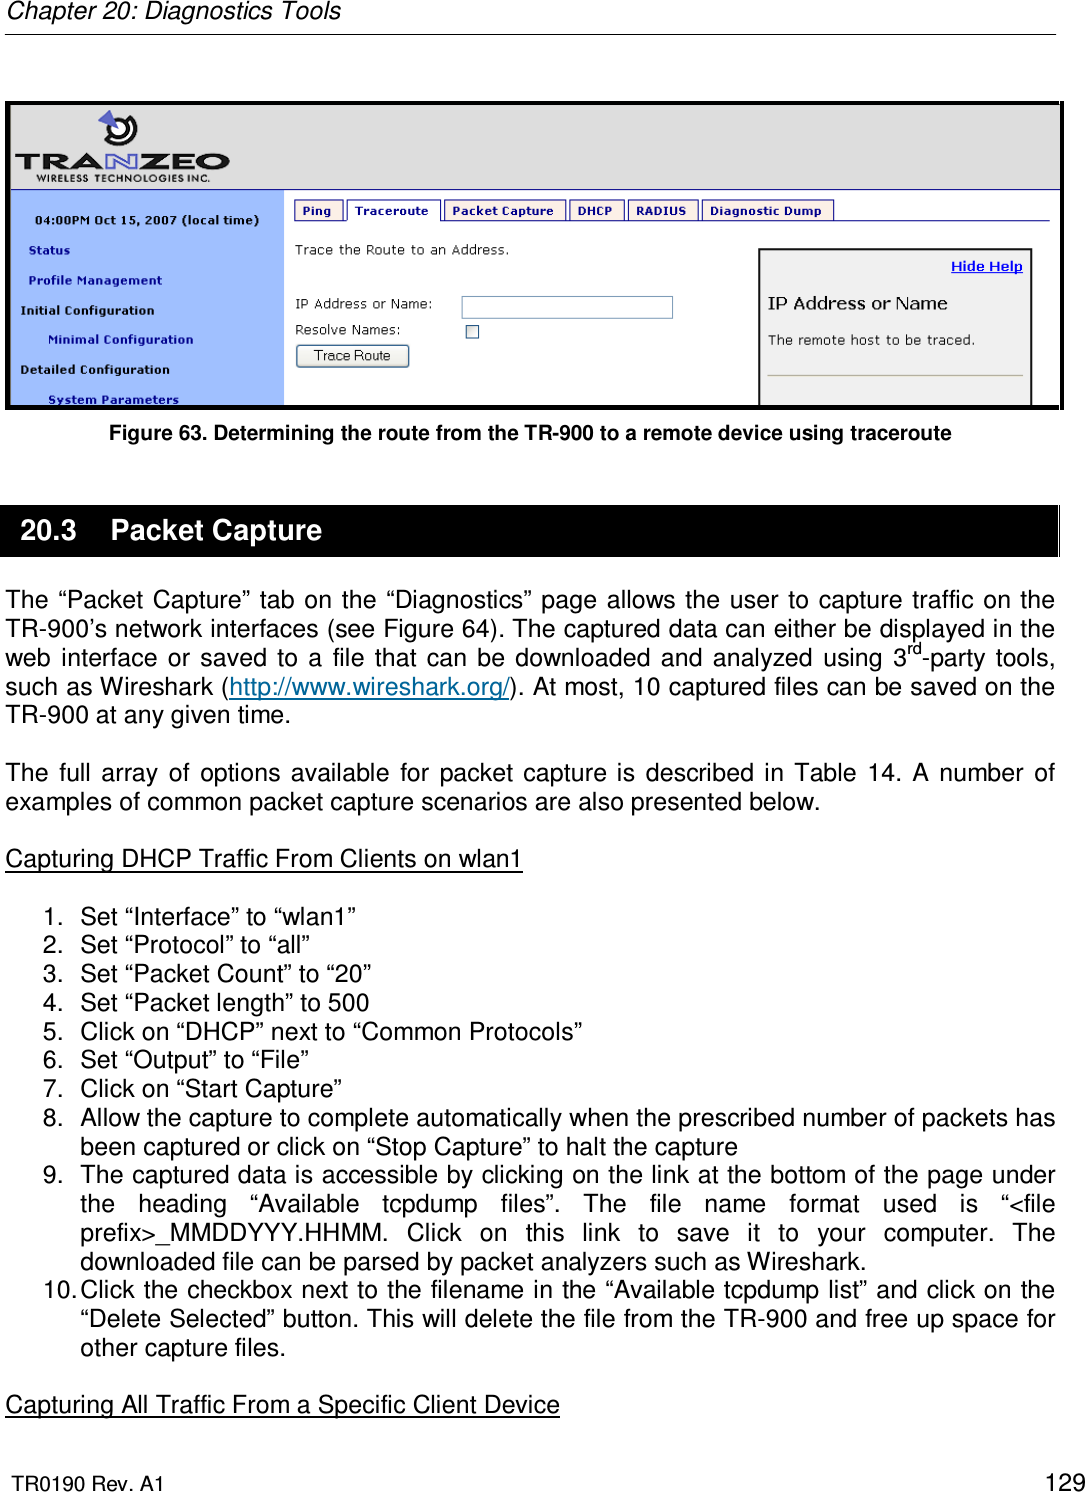 Chapter 20: Diagnostics Tools  TR0190 Rev. A1    129   Figure 63. Determining the route from the TR-900 to a remote device using traceroute 20.3  Packet Capture The “Packet Capture” tab on the “Diagnostics” page allows the user to capture traffic on the TR-900’s network interfaces (see Figure 64). The captured data can either be displayed in the web  interface  or  saved  to a  file  that  can  be  downloaded  and  analyzed  using  3rd-party  tools, such as Wireshark (http://www.wireshark.org/). At most, 10 captured files can be saved on the TR-900 at any given time.  The  full  array  of  options  available  for  packet  capture  is  described  in  Table  14.  A  number  of examples of common packet capture scenarios are also presented below.  Capturing DHCP Traffic From Clients on wlan1  1.  Set “Interface” to “wlan1” 2.  Set “Protocol” to “all” 3.  Set “Packet Count” to “20” 4.  Set “Packet length” to 500 5.  Click on “DHCP” next to “Common Protocols” 6.  Set “Output” to “File” 7.  Click on “Start Capture” 8.  Allow the capture to complete automatically when the prescribed number of packets has been captured or click on “Stop Capture” to halt the capture 9.  The captured data is accessible by clicking on the link at the bottom of the page under the  heading  “Available  tcpdump  files”.  The  file  name  format  used  is  “&lt;file prefix&gt;_MMDDYYY.HHMM.  Click  on  this  link  to  save  it  to  your  computer.  The downloaded file can be parsed by packet analyzers such as Wireshark. 10. Click the checkbox next to the filename in the “Available tcpdump list” and click on the “Delete Selected” button. This will delete the file from the TR-900 and free up space for other capture files.  Capturing All Traffic From a Specific Client Device 